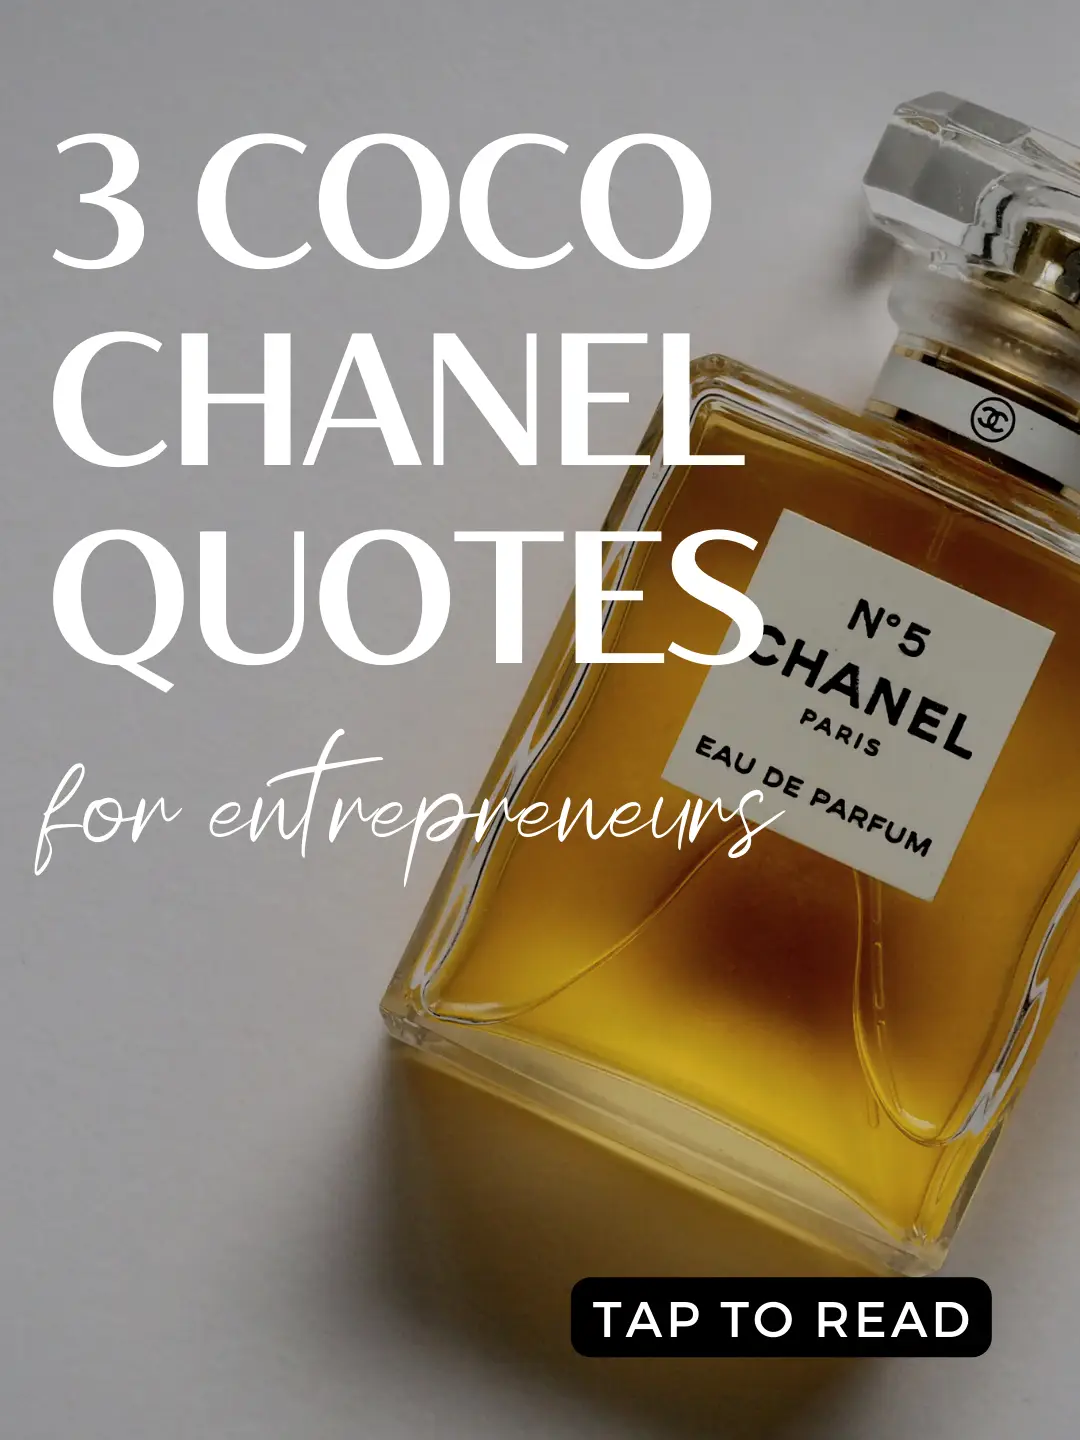 Coco Chanel Quote, The 'G' Spot, Limited Edition 22x 15x Signed  Fairchild Paris